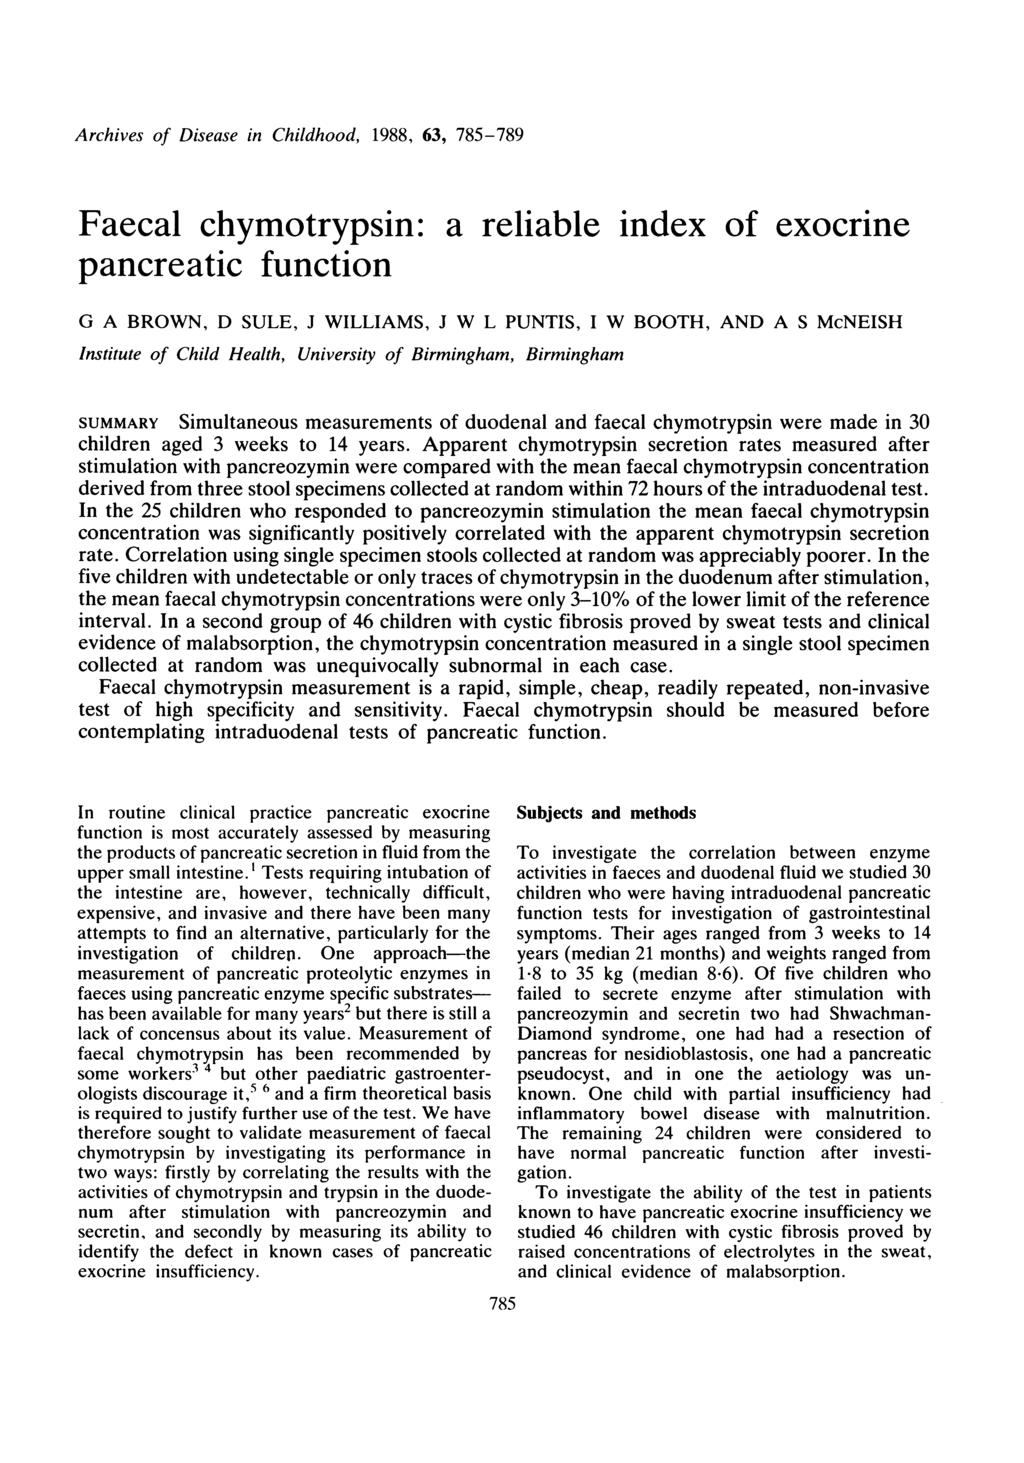 Archives of Disese in Childhood, 1988, 63, 785-789 Fecl chymotrypsin: relible index of exocrine pncretic function G A BROWN, D SULE, J WILLIAMS, J W L PUNTIS, I W BOOTH, AND A S McNEISH Institute of